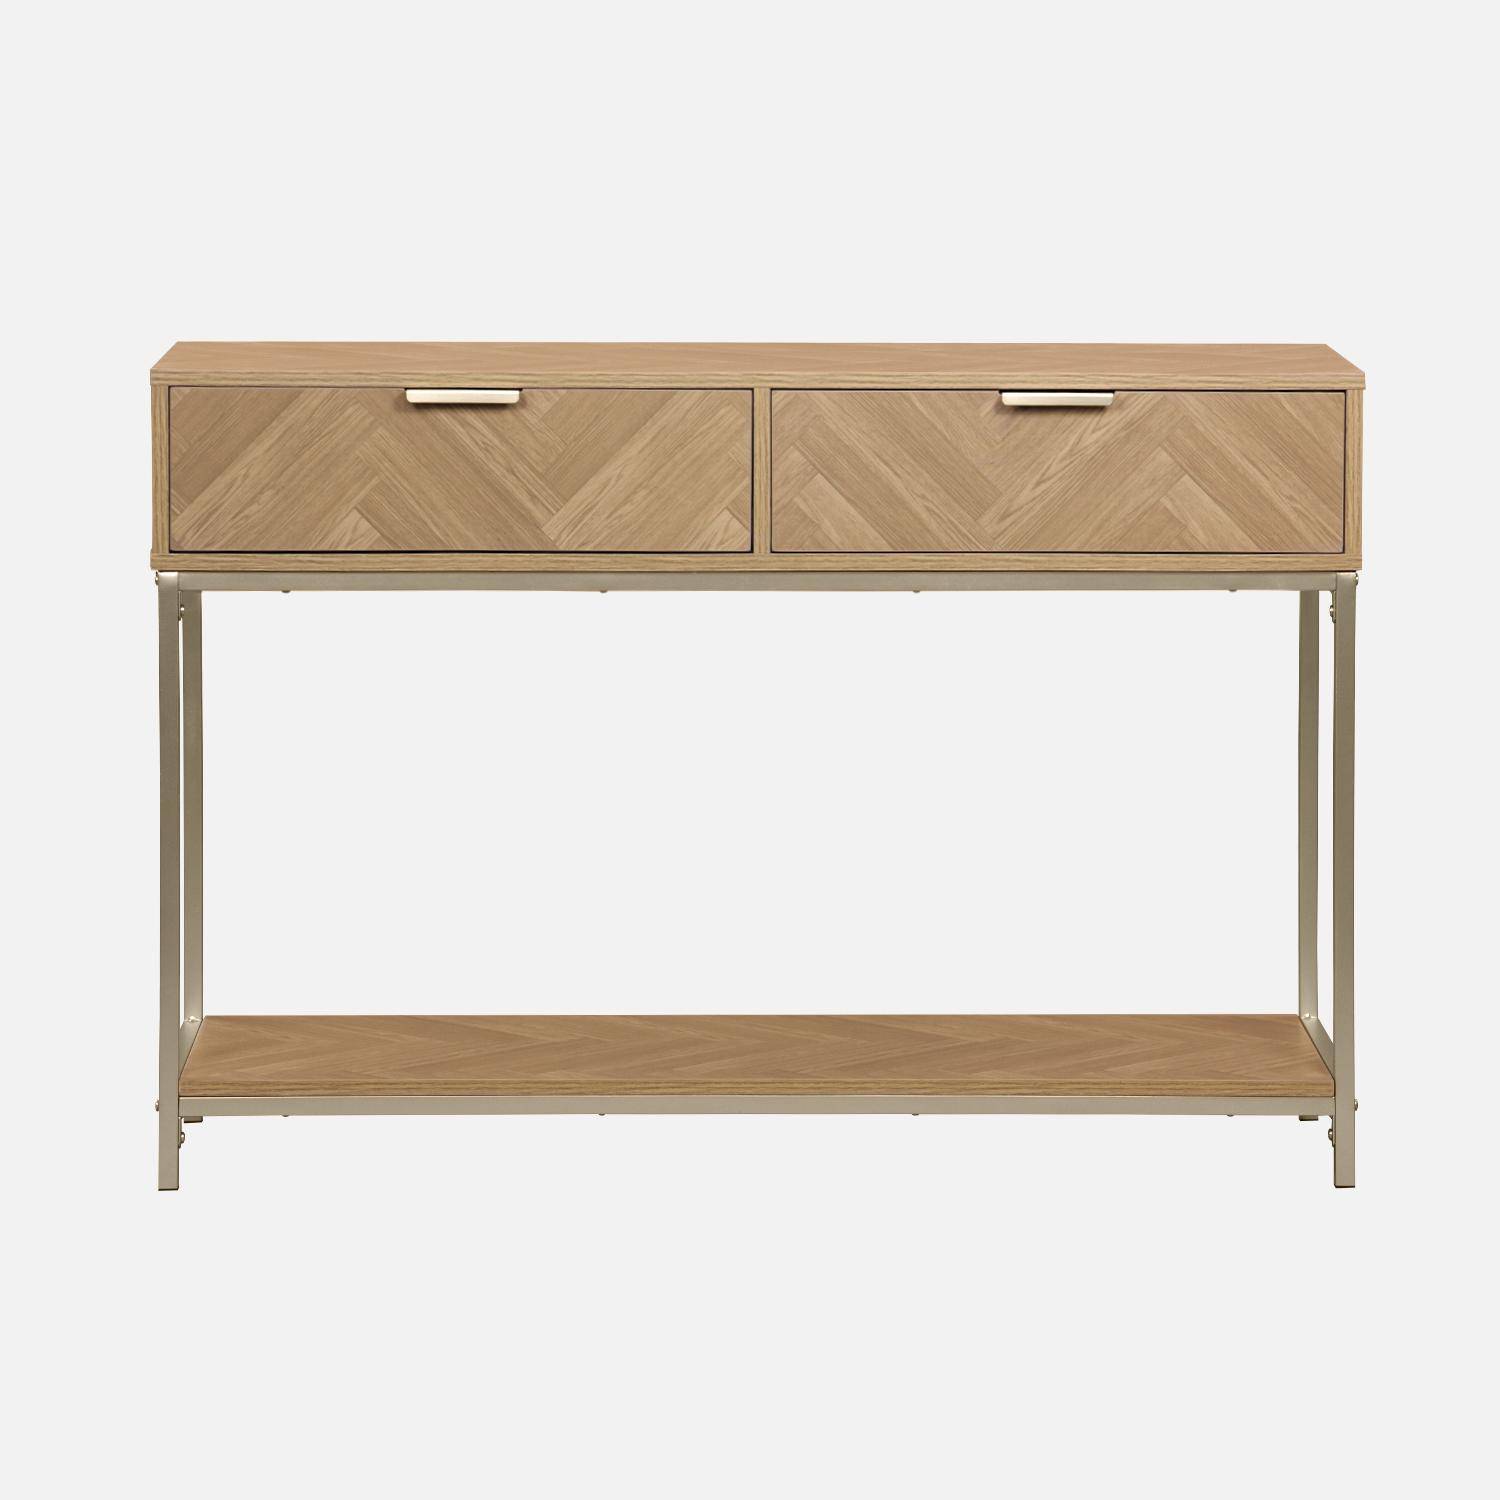 Herringbone hallway console table with 2 drawers, 110x35x75cm - Budapest - Natural Photo4